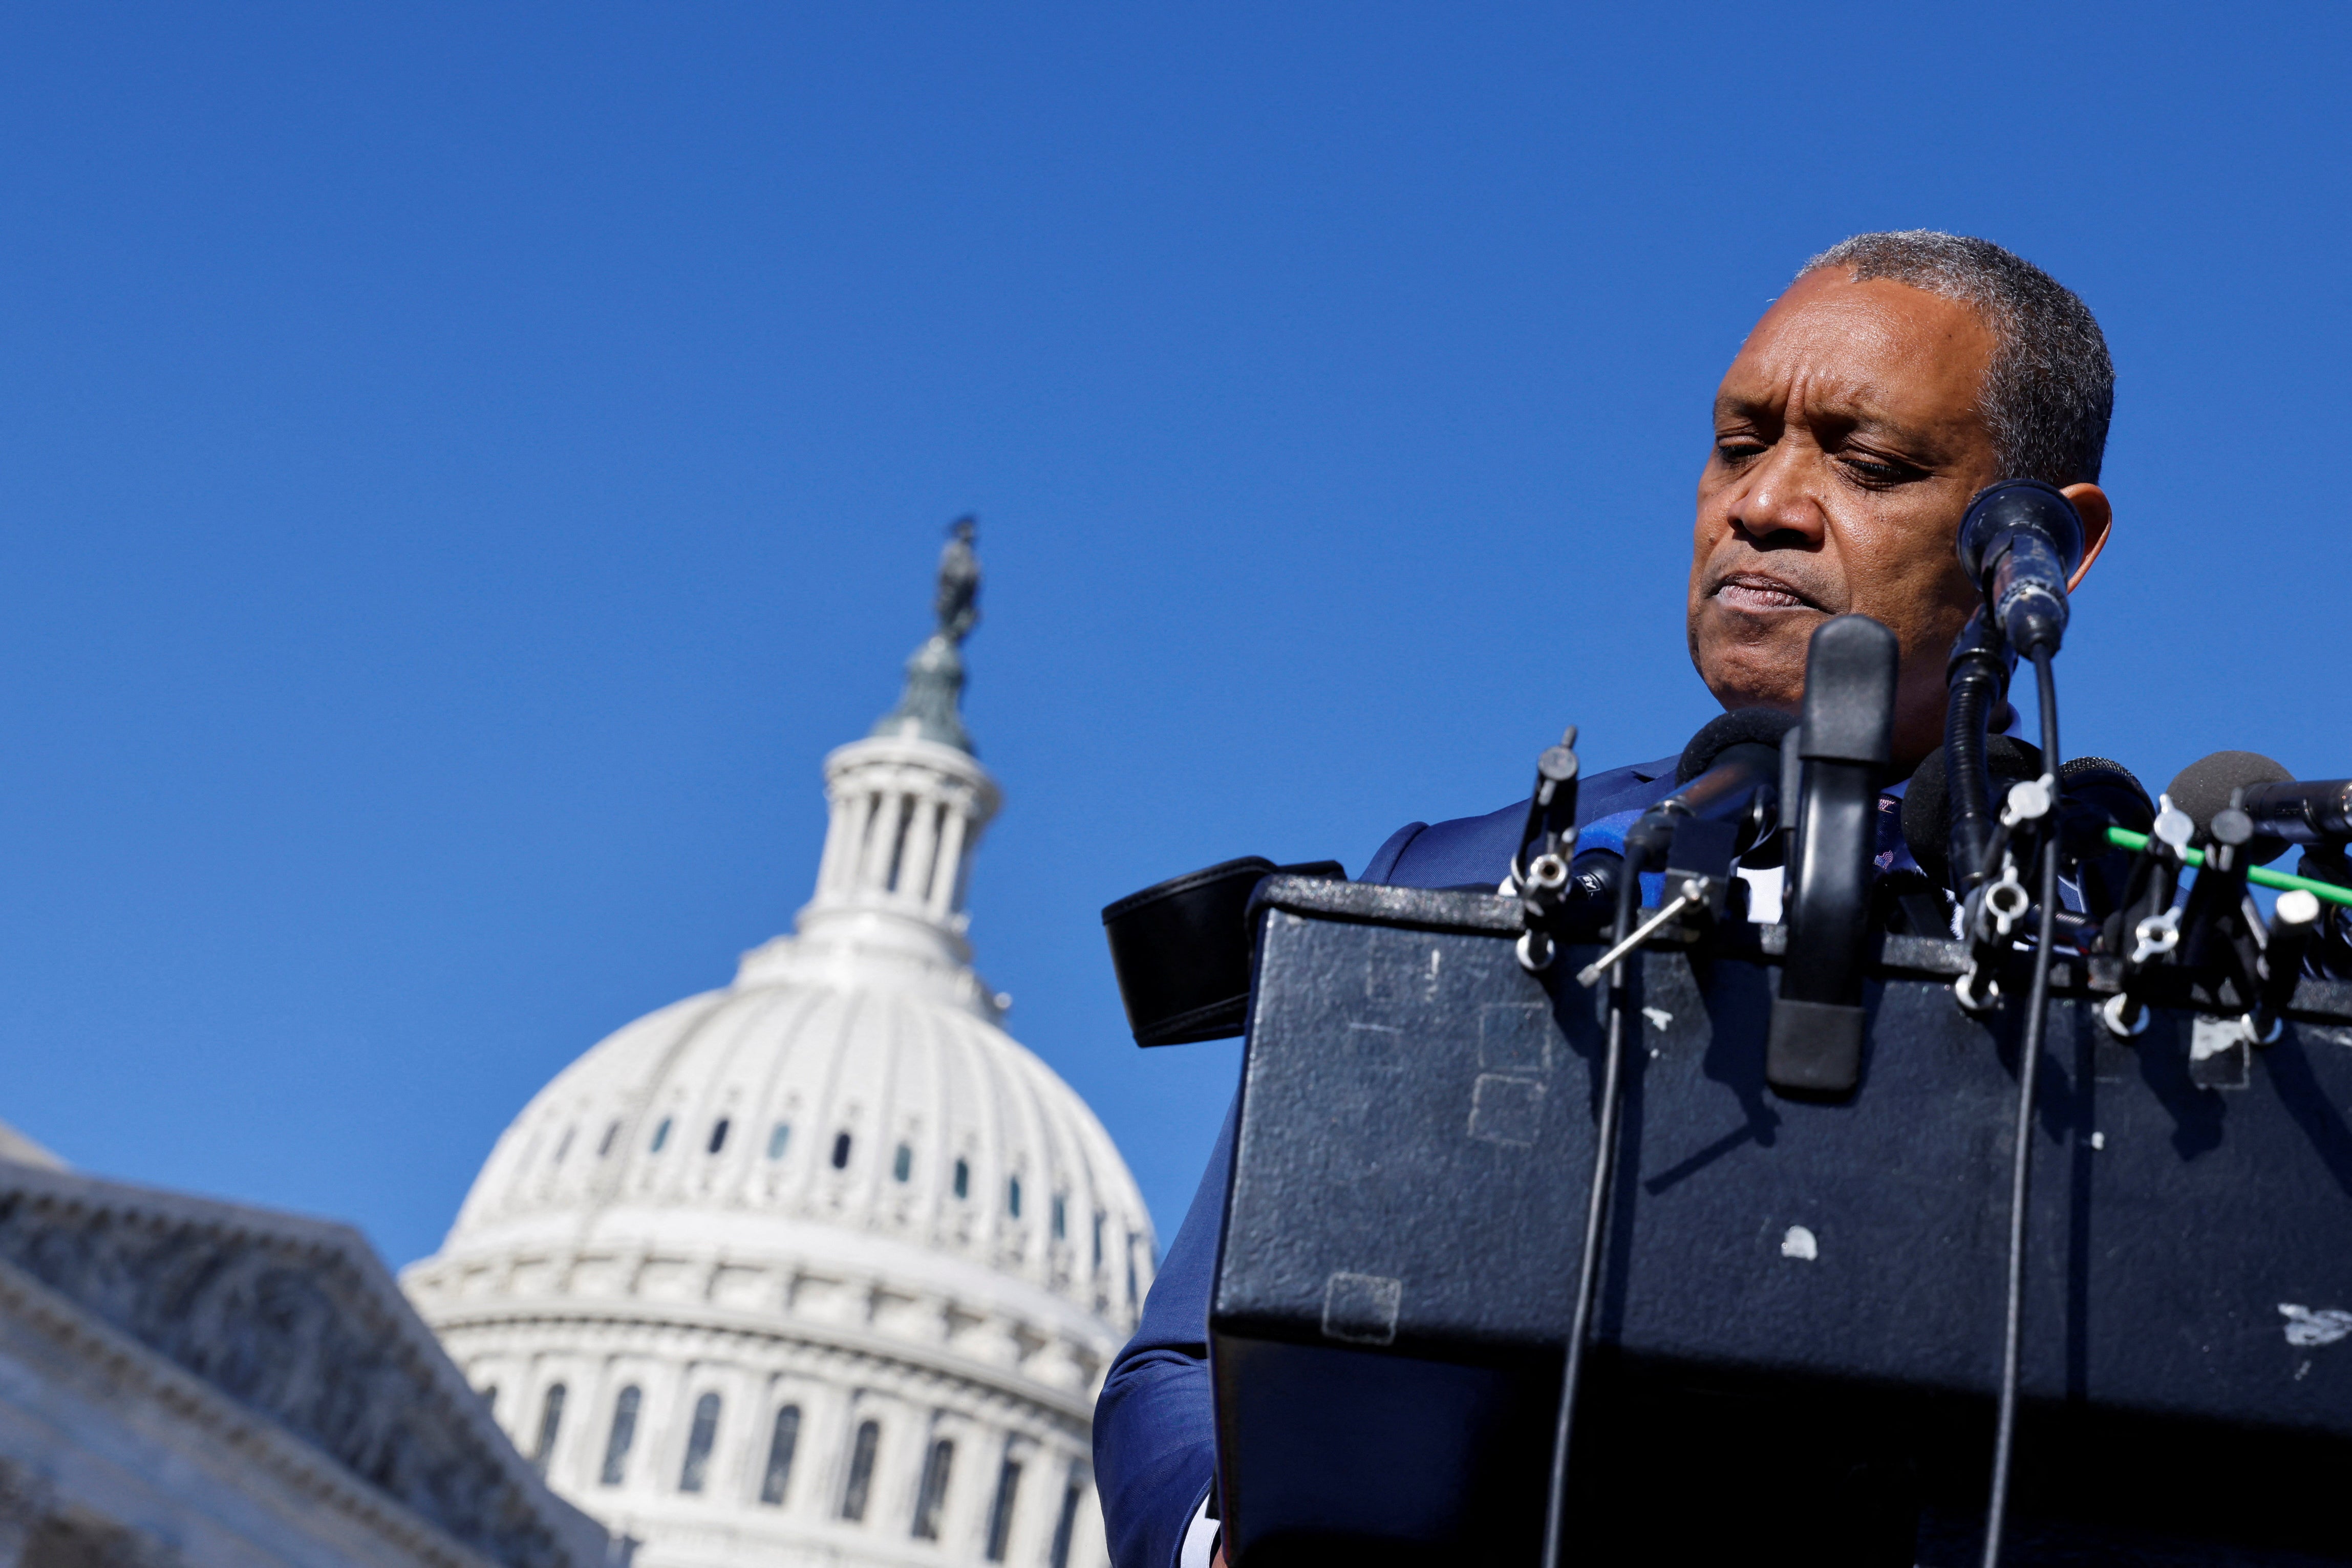 Washington DC attorney general Karl Racine, States United Democracy Center and others joined a lawsuit against extremist groups for their role in the Capitol riot